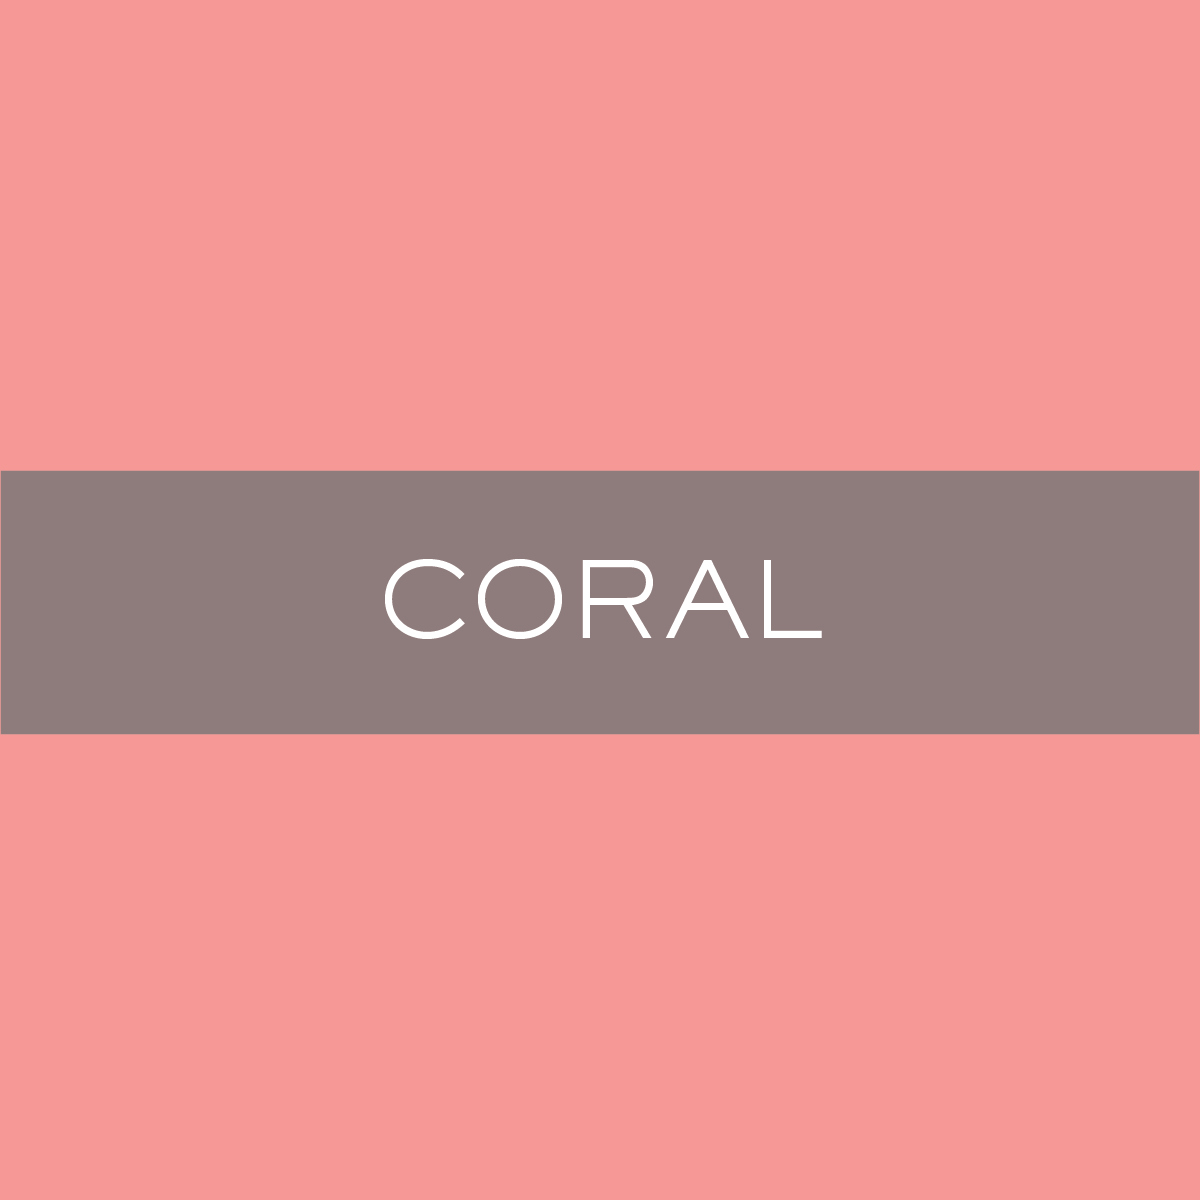 INK_Coral.png